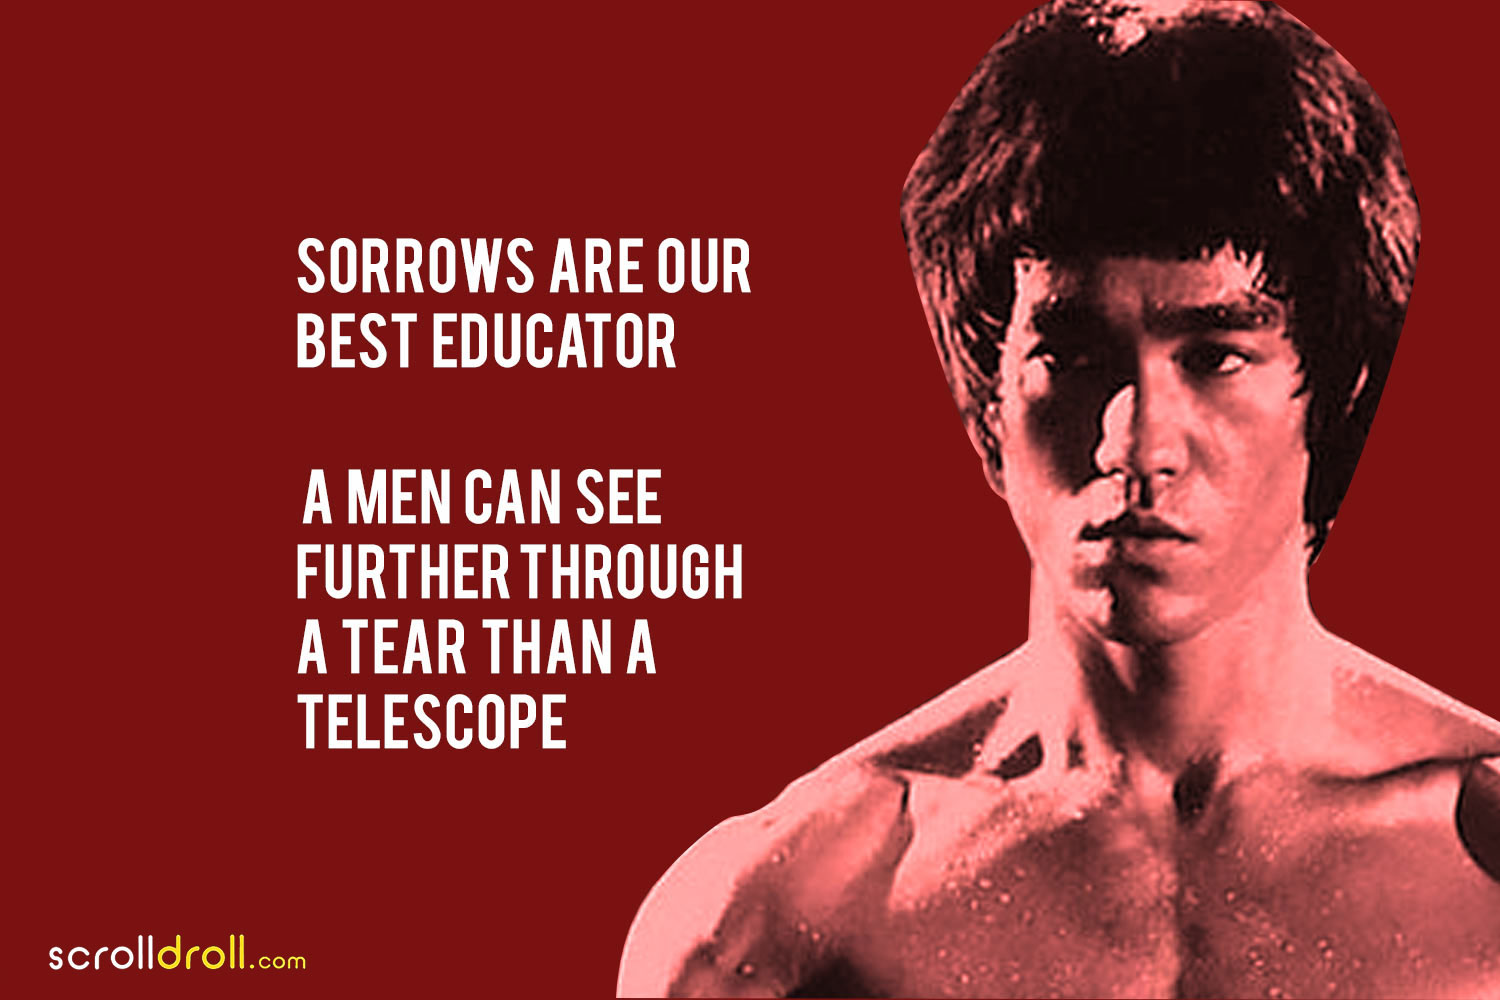 bruce lee quotes 10 - The Best of Indian Pop Culture & What's ...